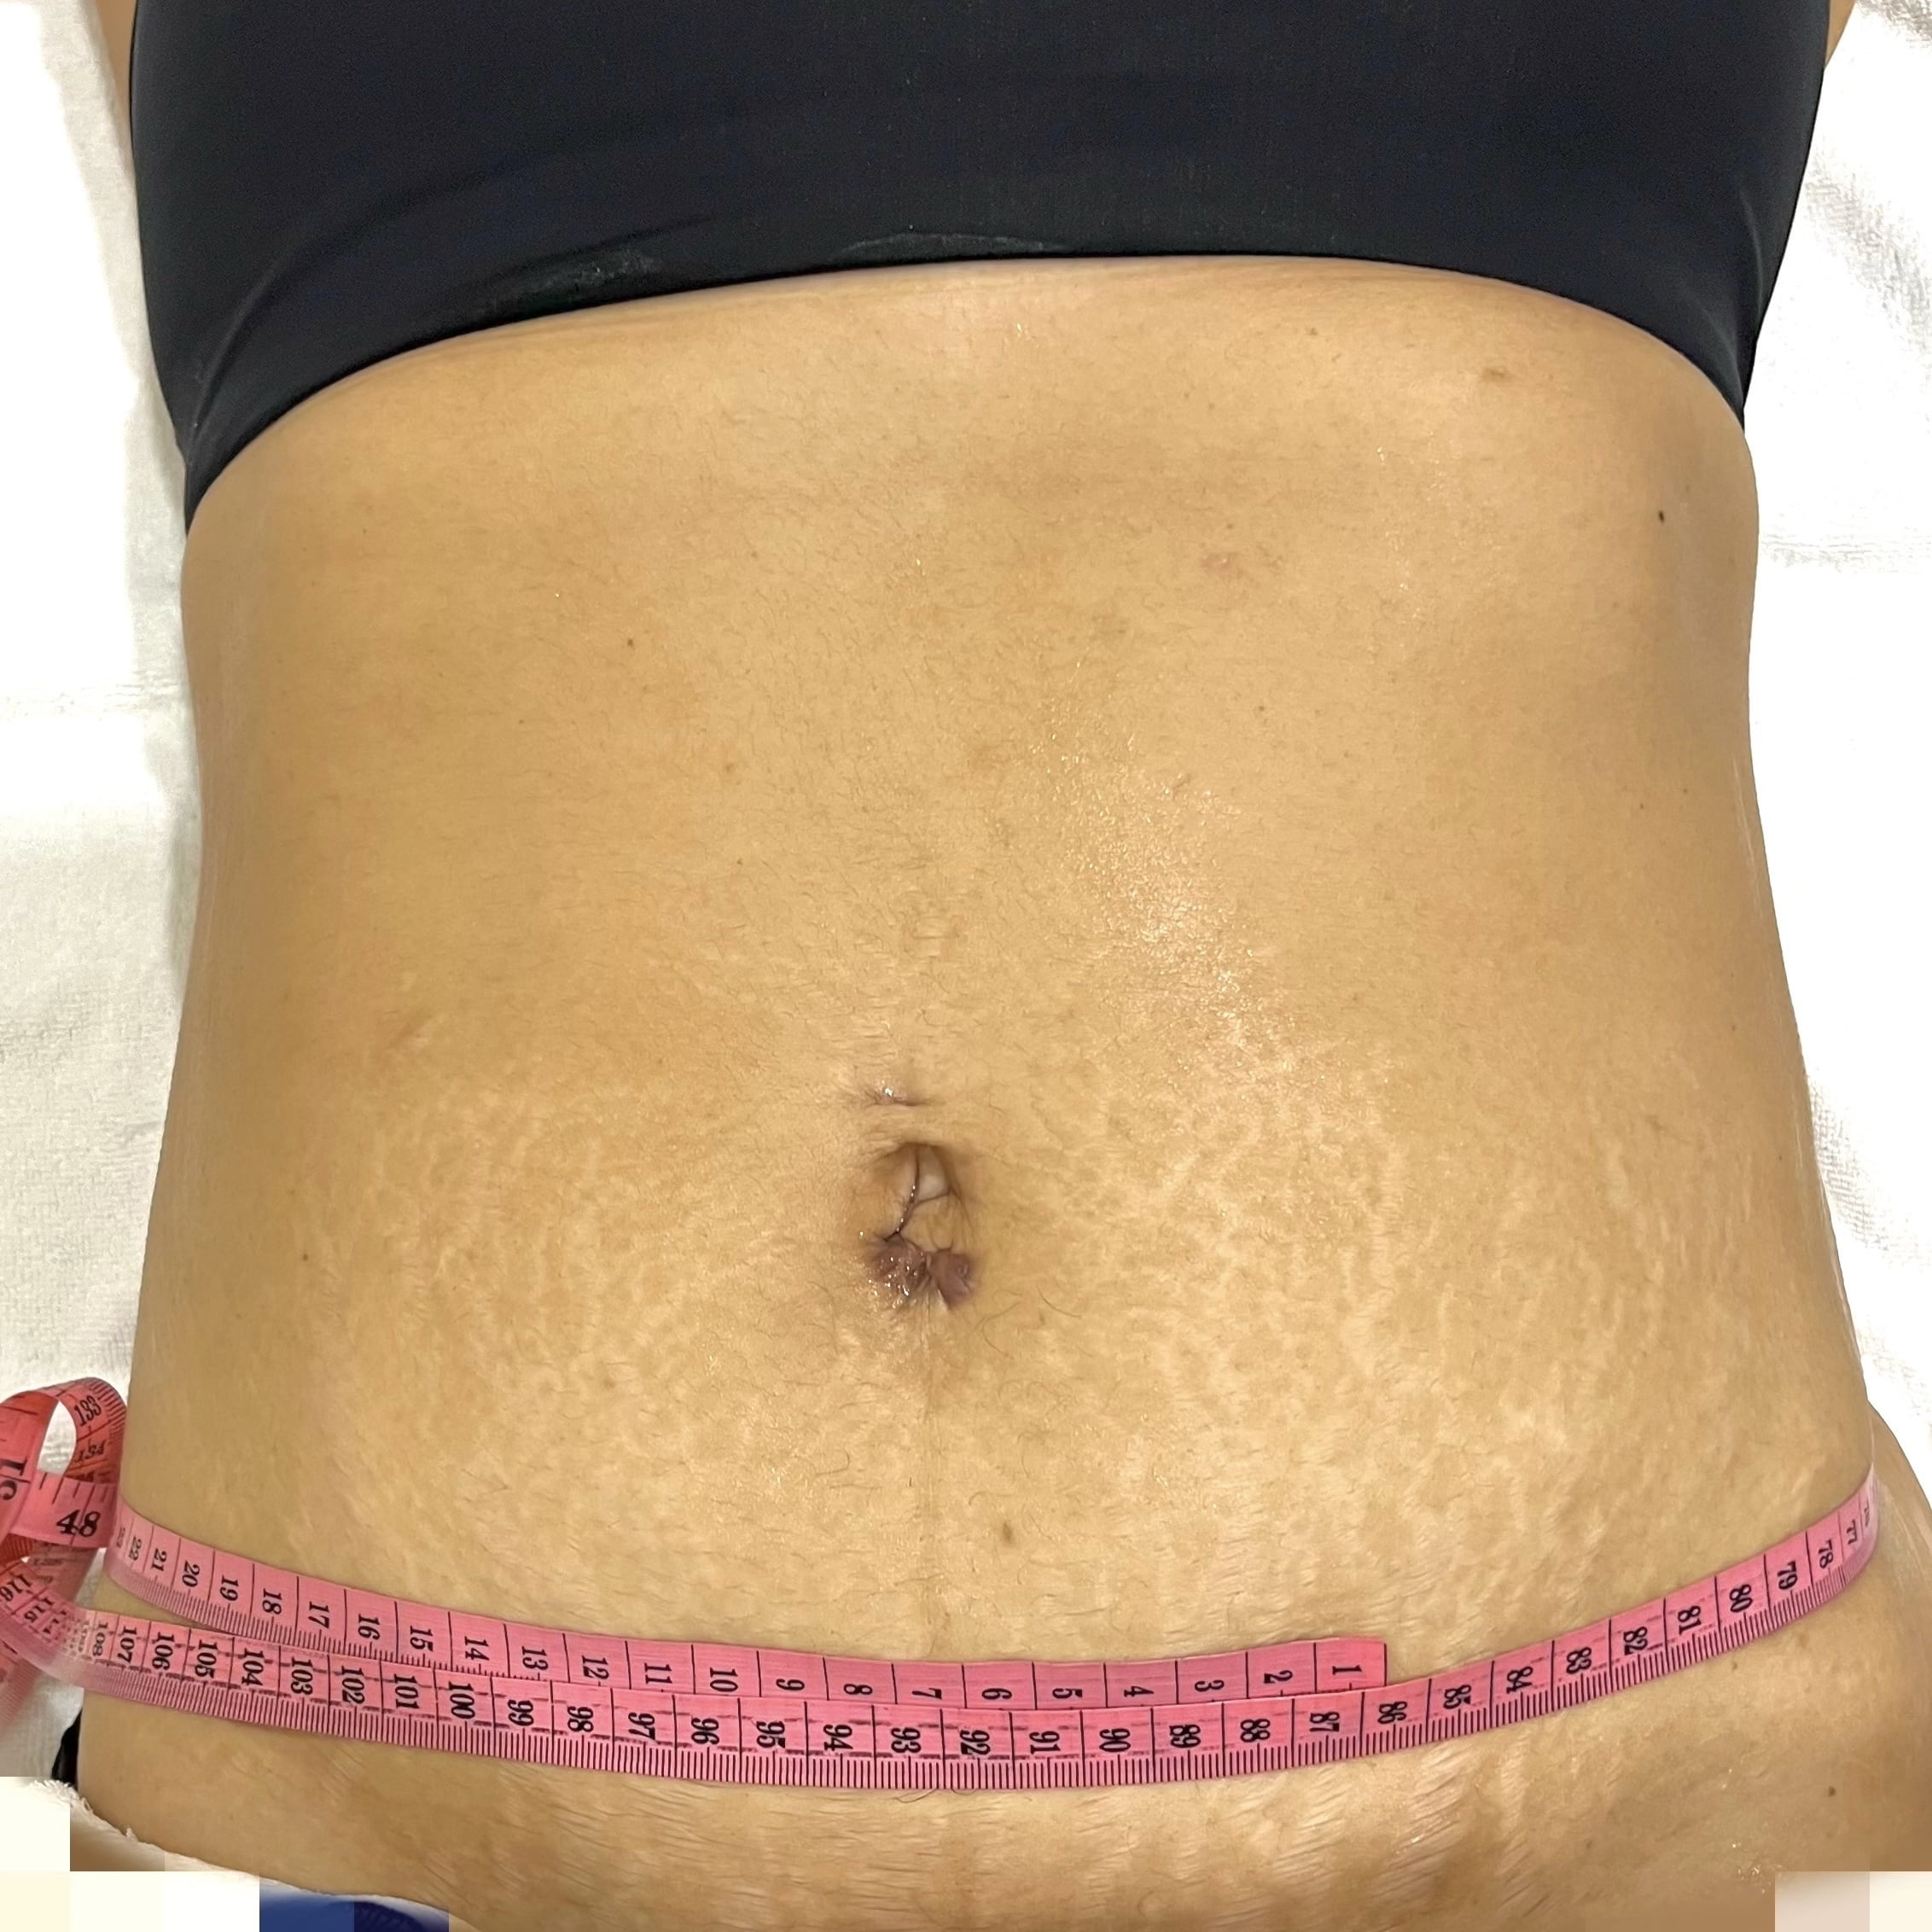 Client after 1 session of Ultraformer III skin tightening for tummy